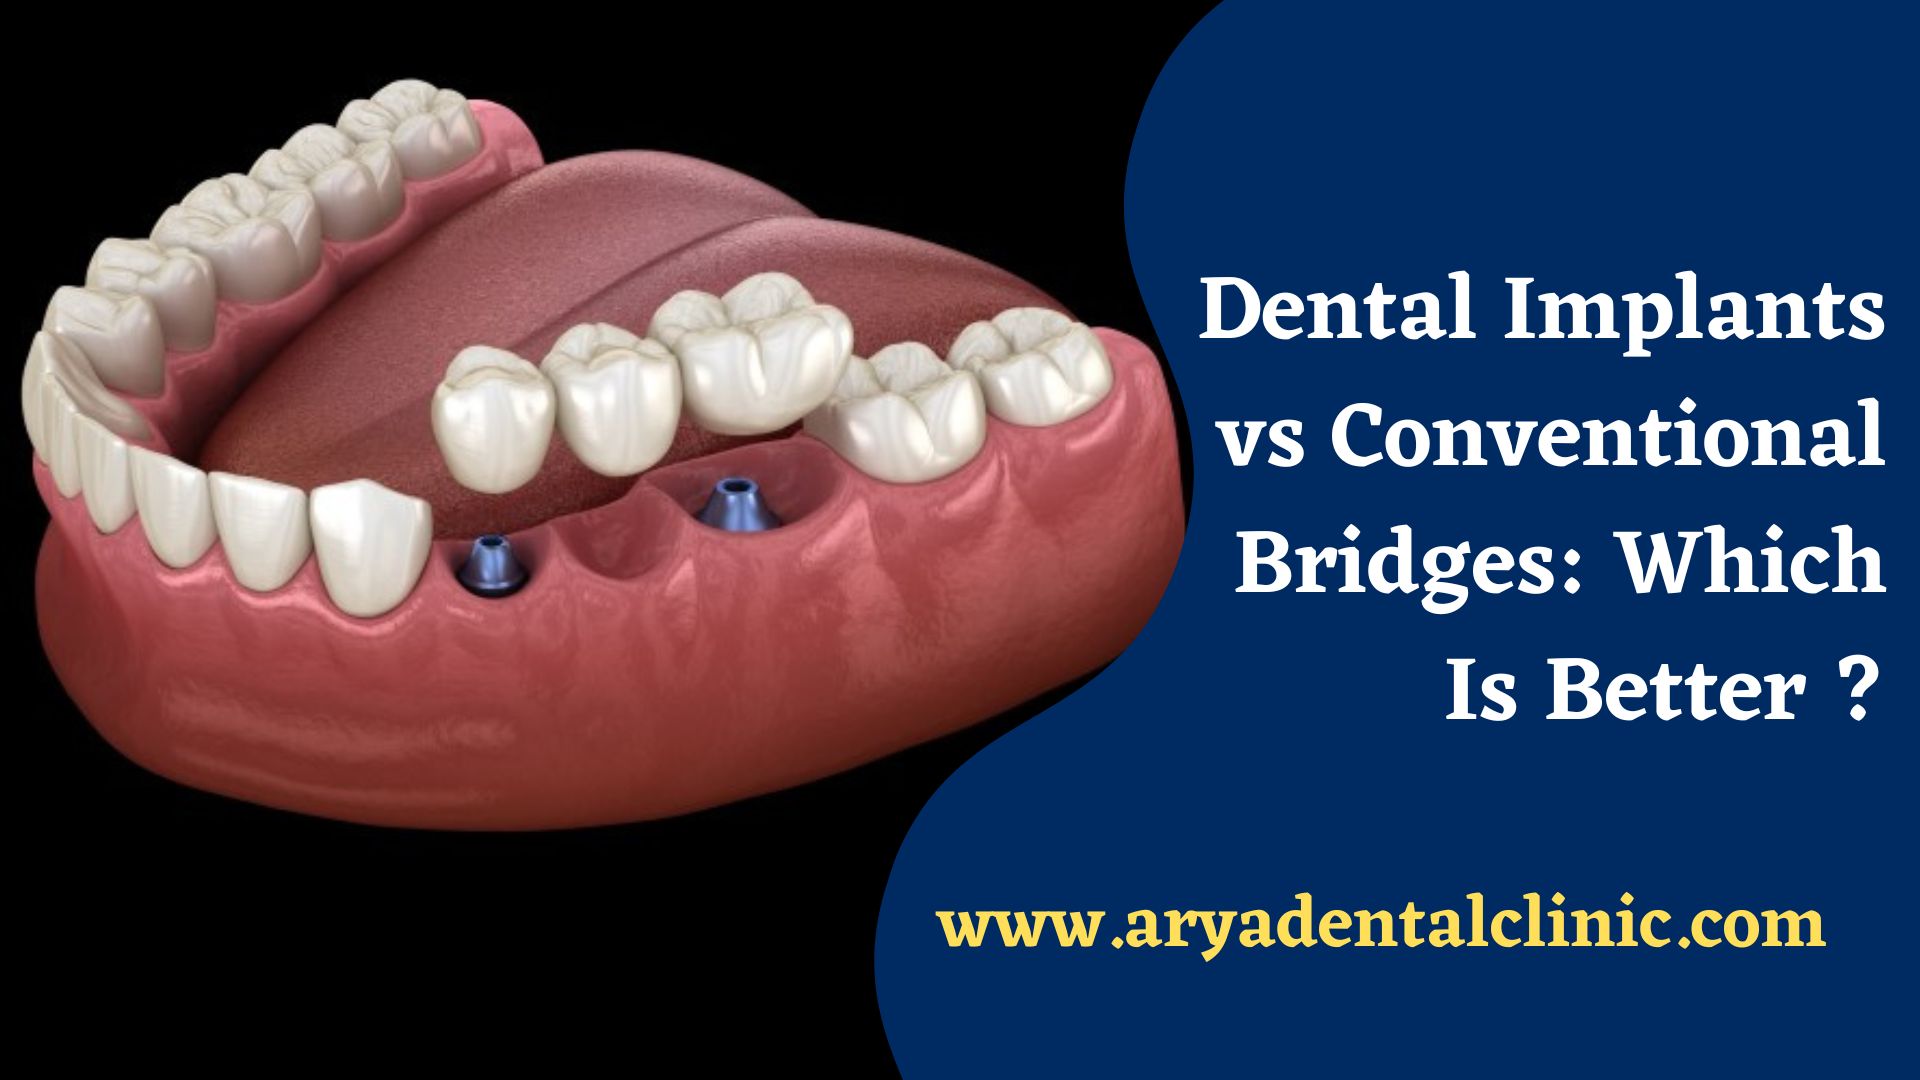 You are currently viewing Dental Implants vs Conventional Bridges: Which Is Better?